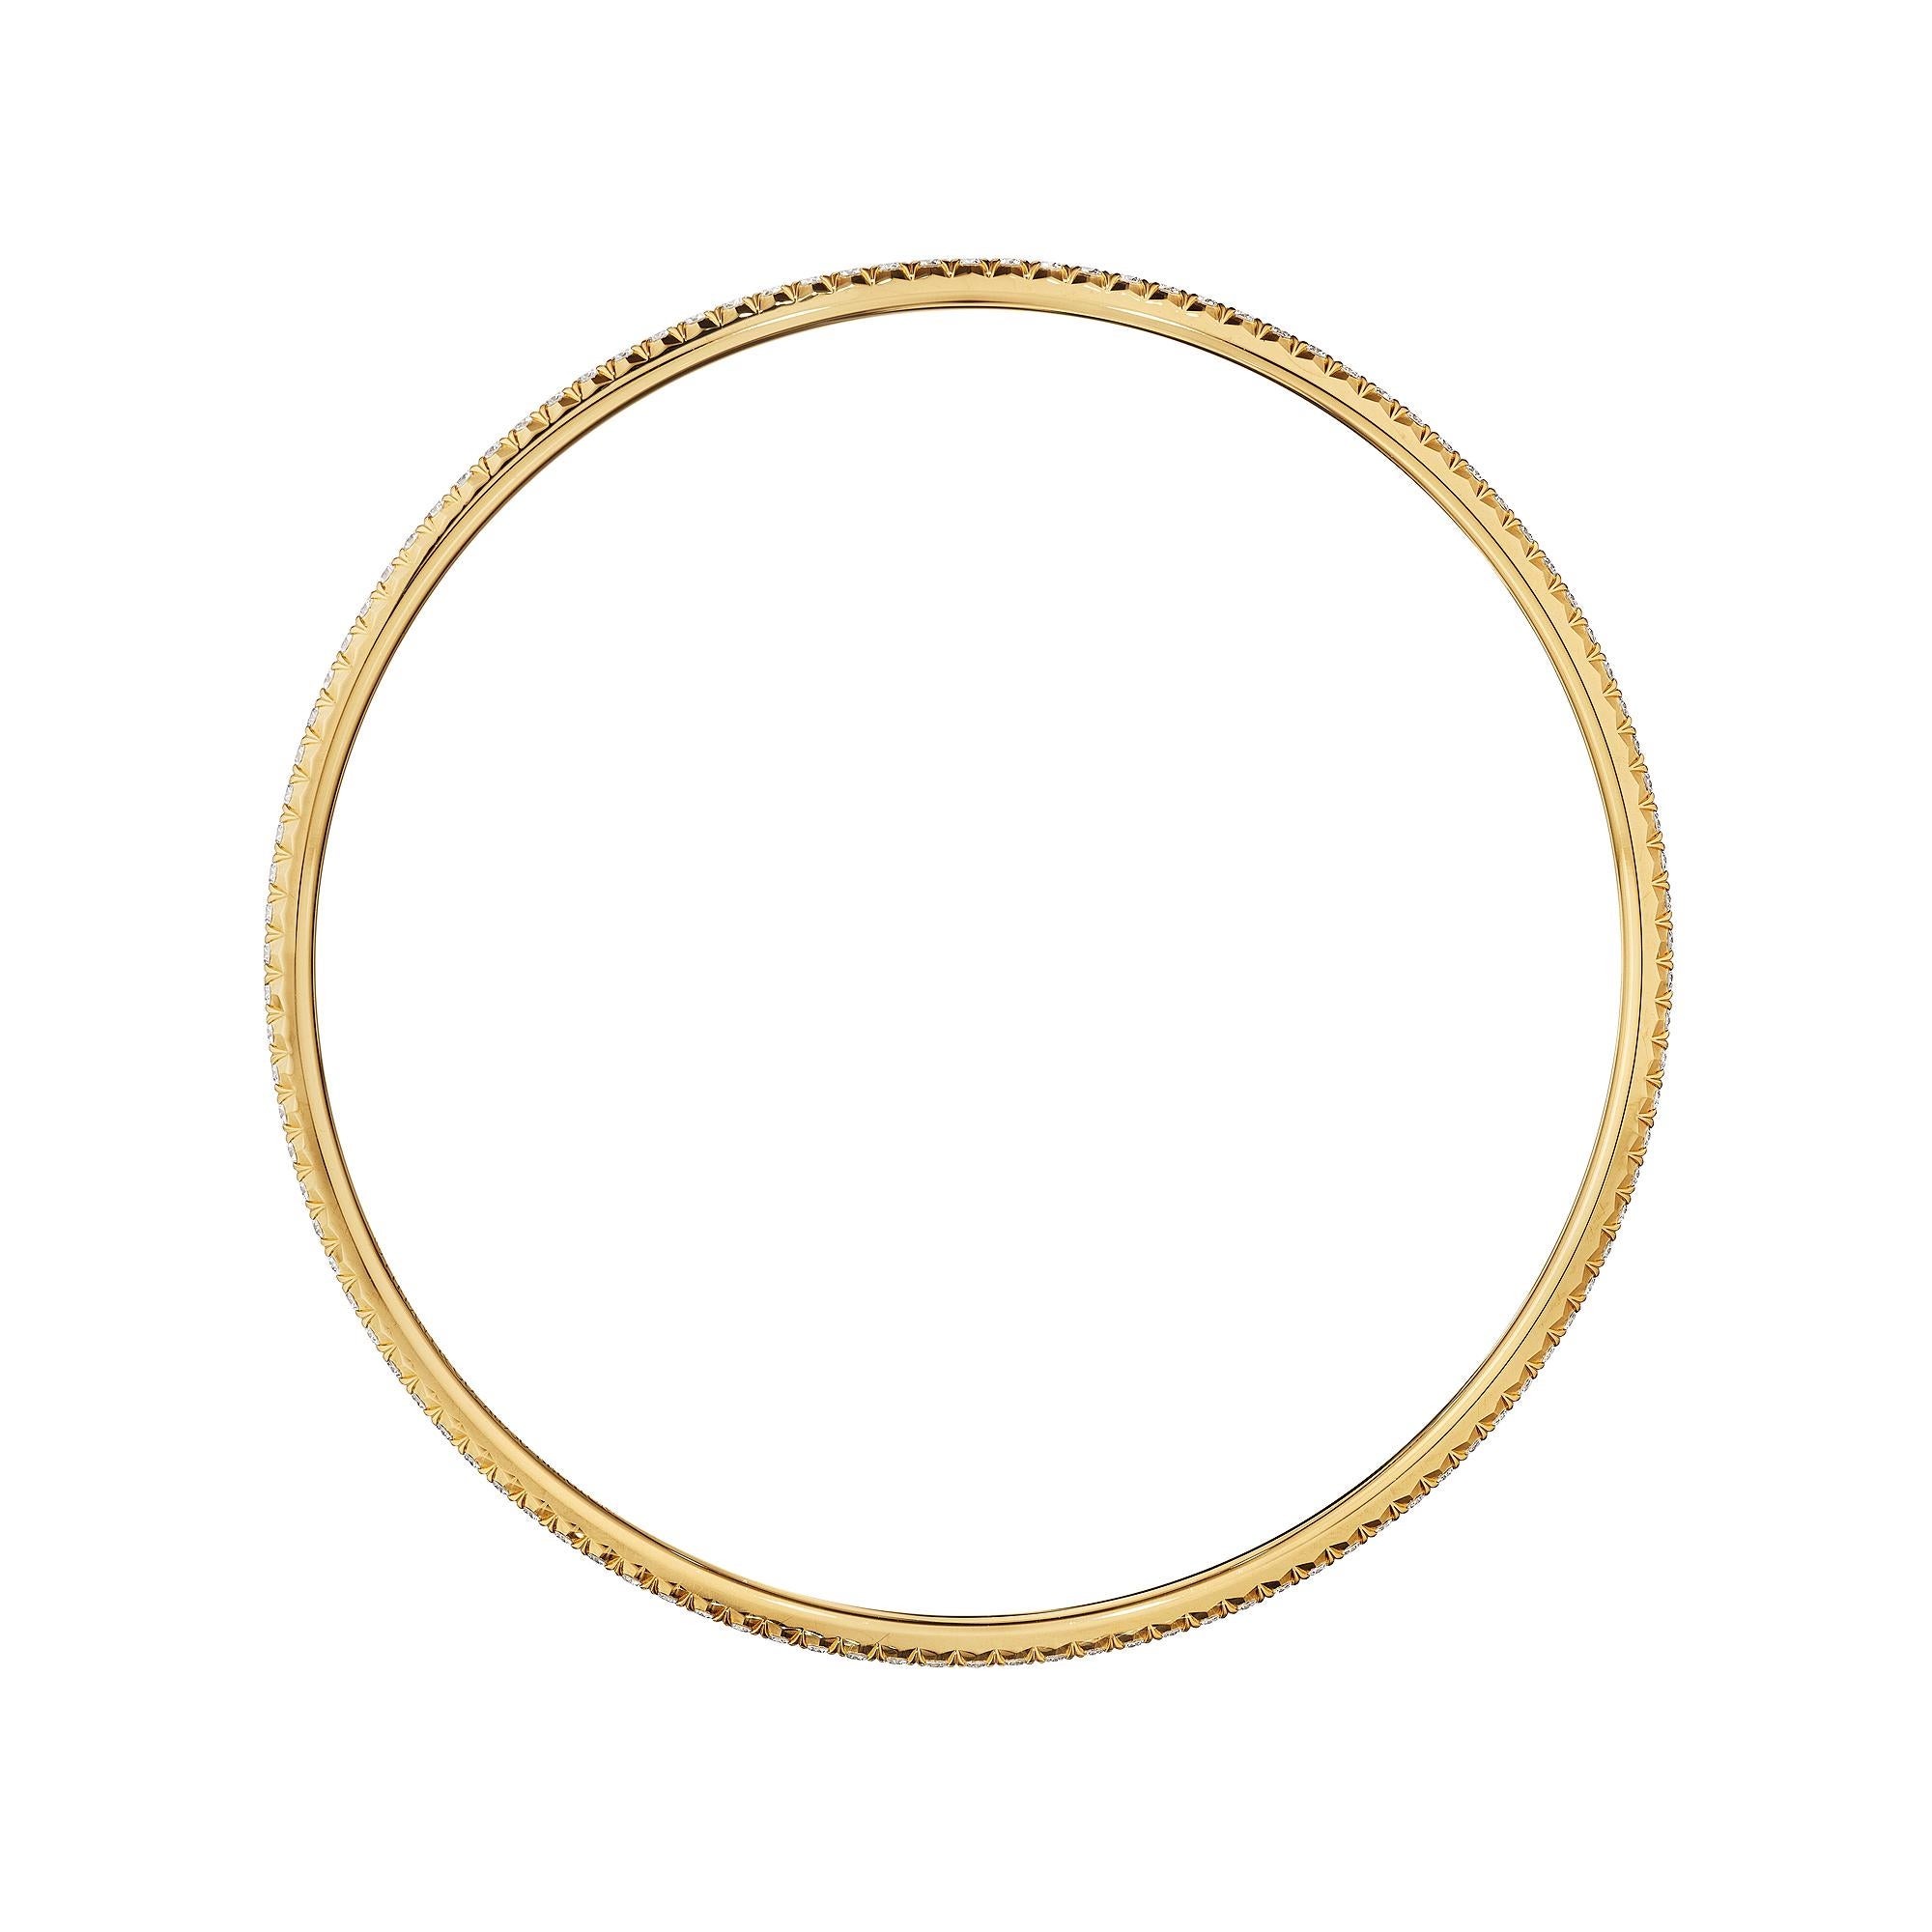 With a delicately ethereal spirit, this Tiffany & Co. diamond and 18 karat yellow gold modernist bangle bracelet is femininity at its best.  Signed Tiffany & Co. Belgium.  Circa 2020.  Size medium.  2 1/2